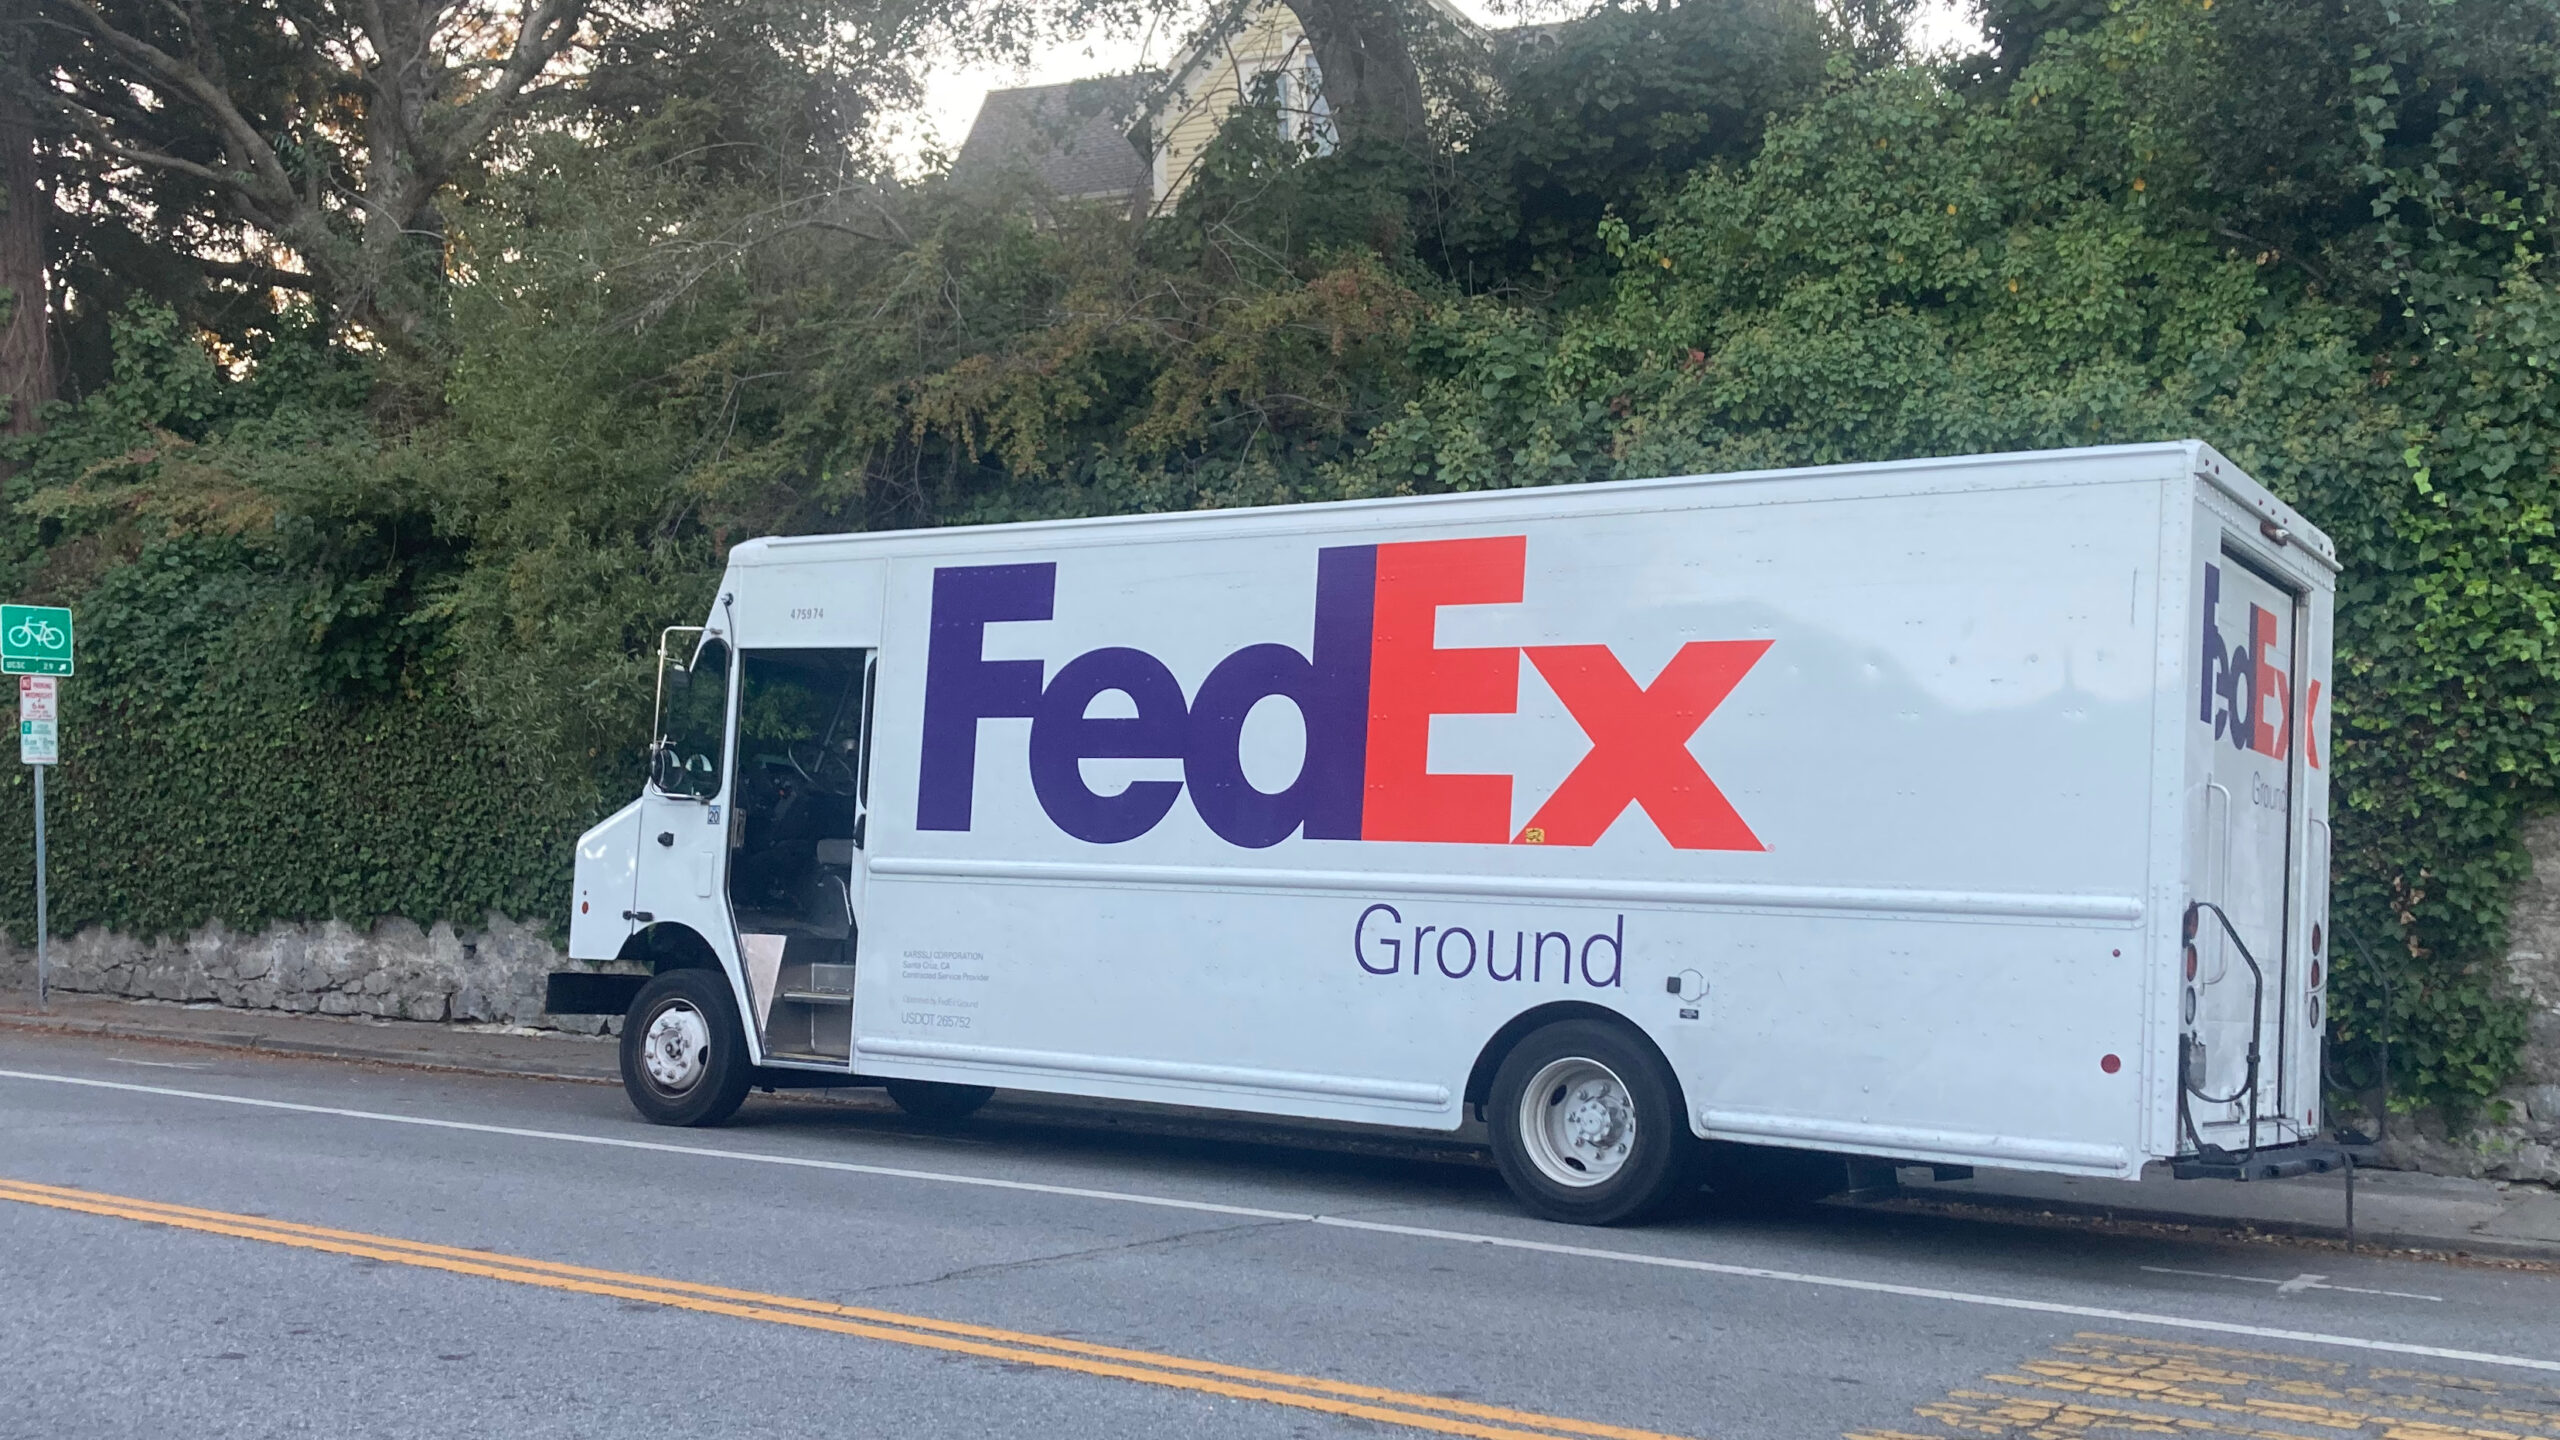 A FedEx truck is parked on an uphill street in front of a wall covered in ivy